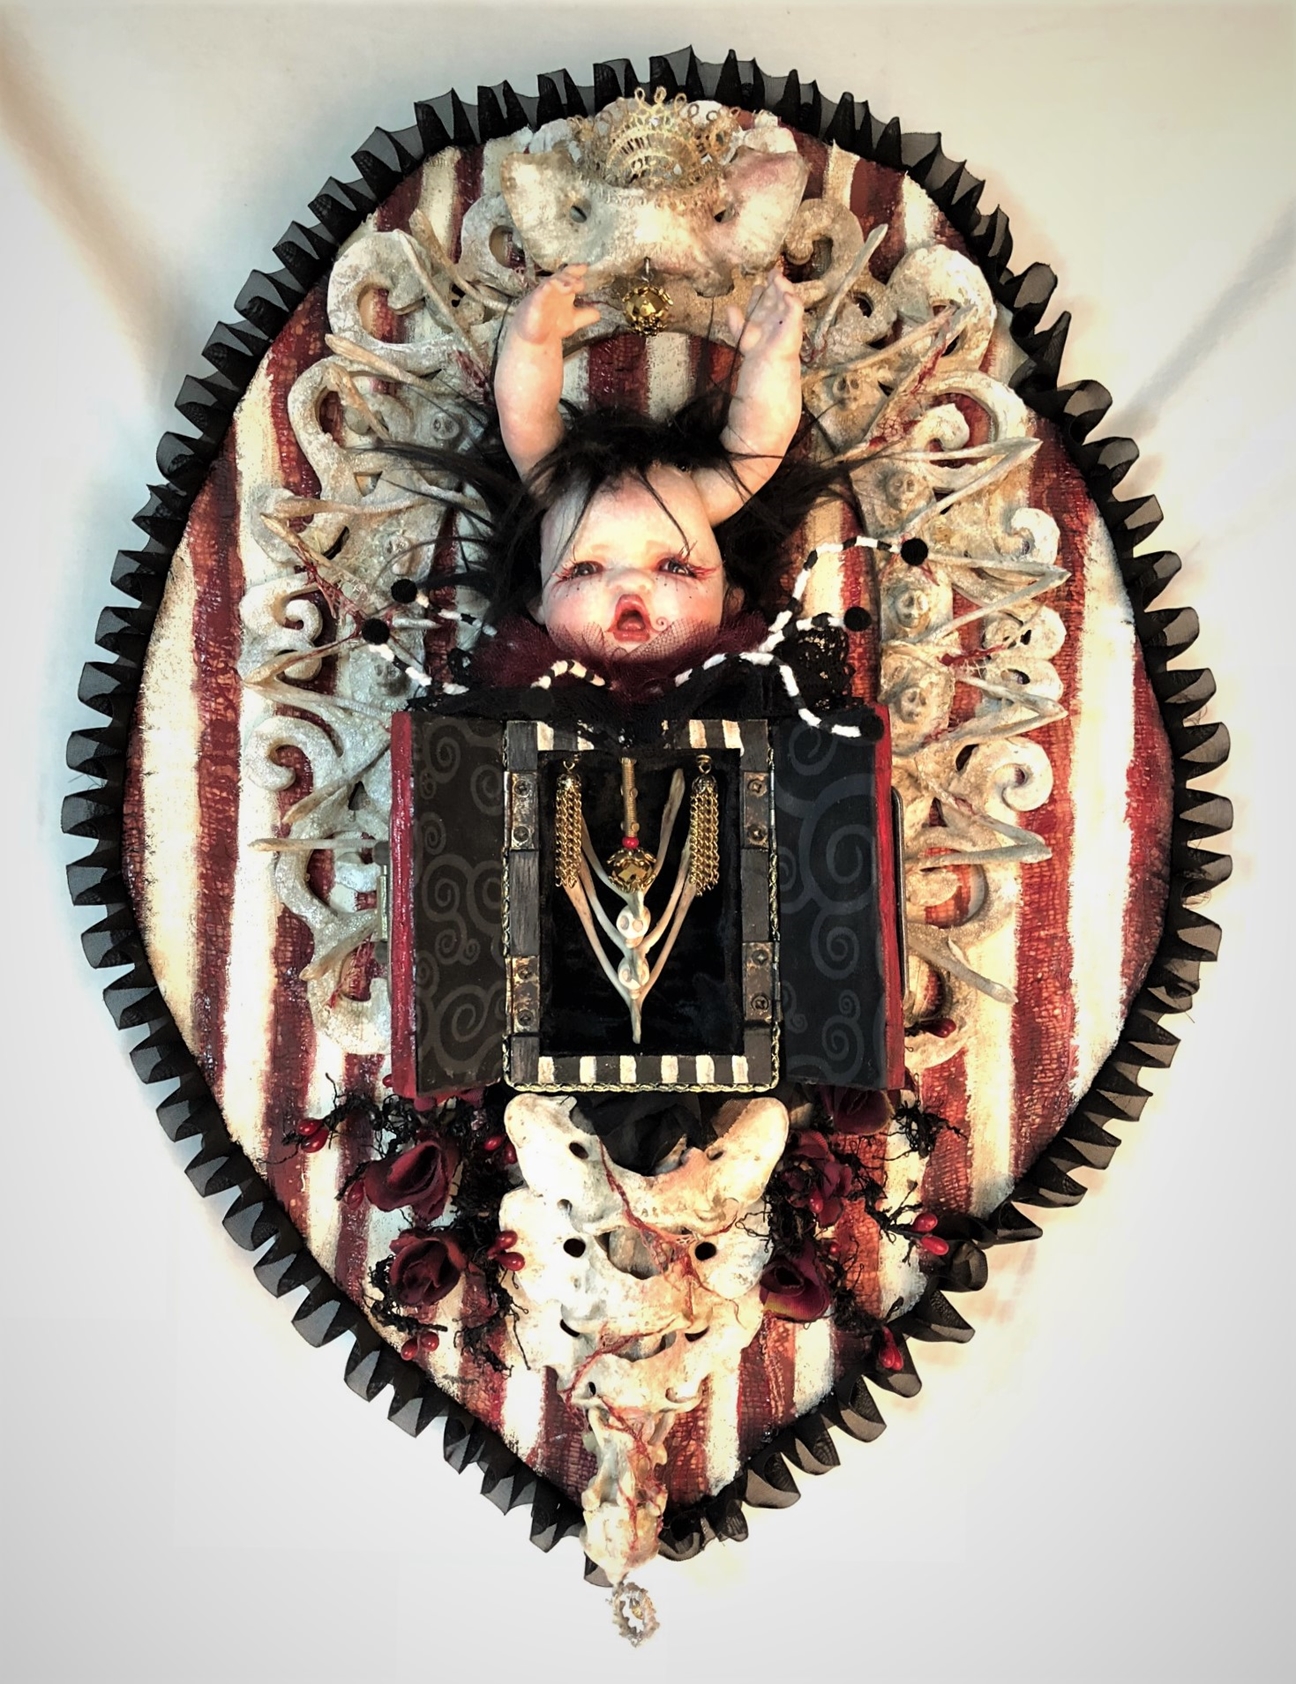 gothic red black and white mixed media assemblage artpiece plaque with a repaint porcelain babydoll head with arms for horns, striped open cabinet, vertebrae, surrounded by wishbones on a painted wooden board